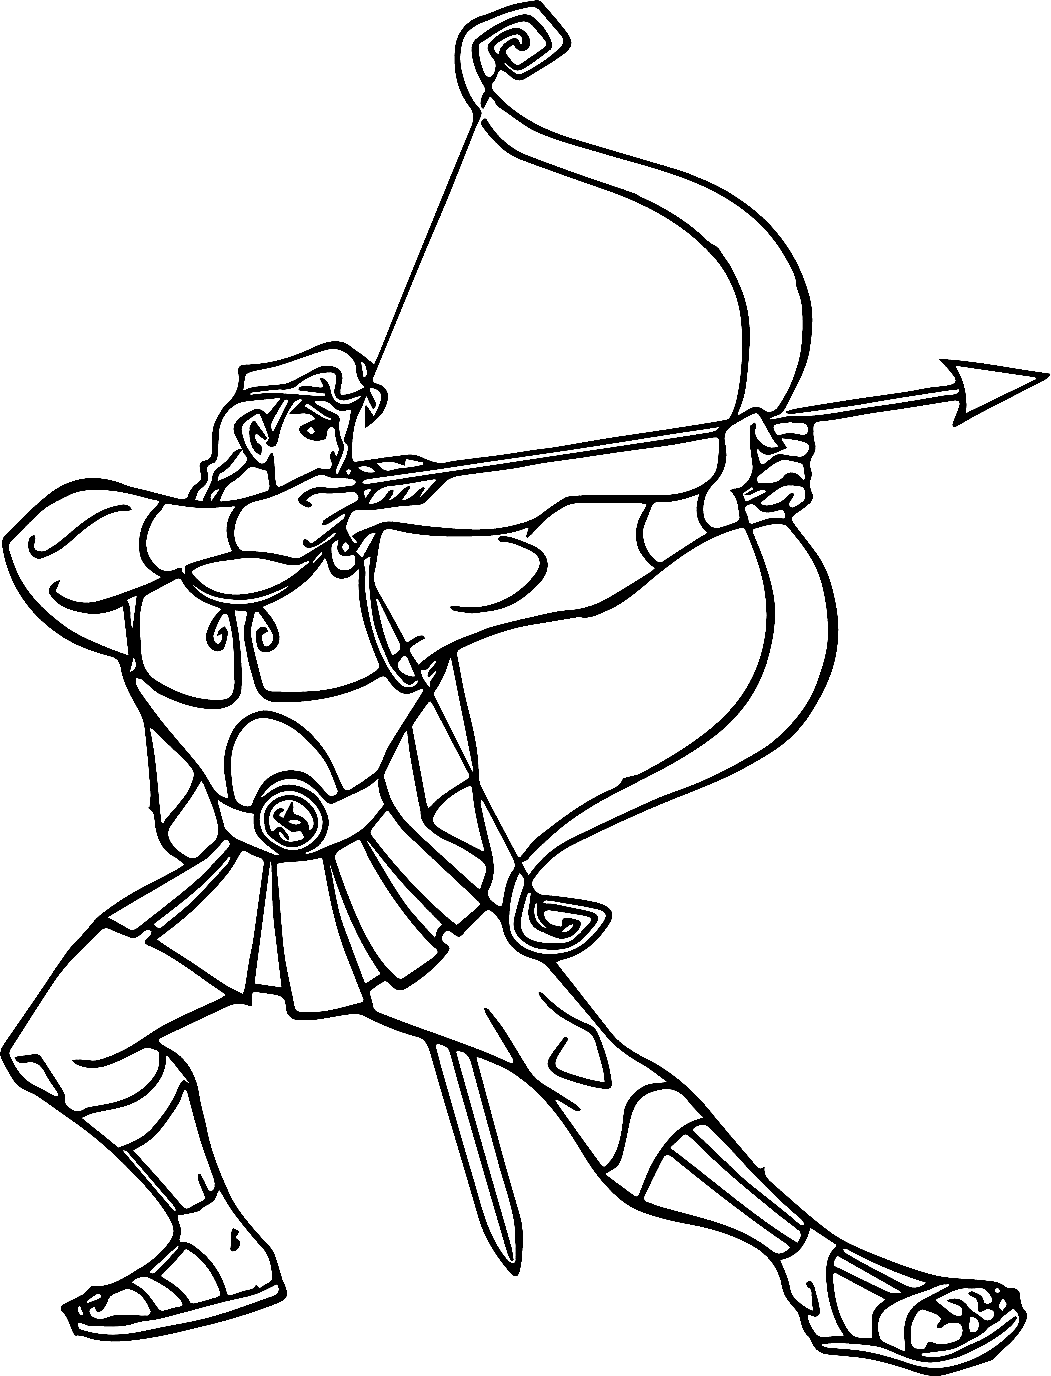 Hercules Archery Coloring Pages